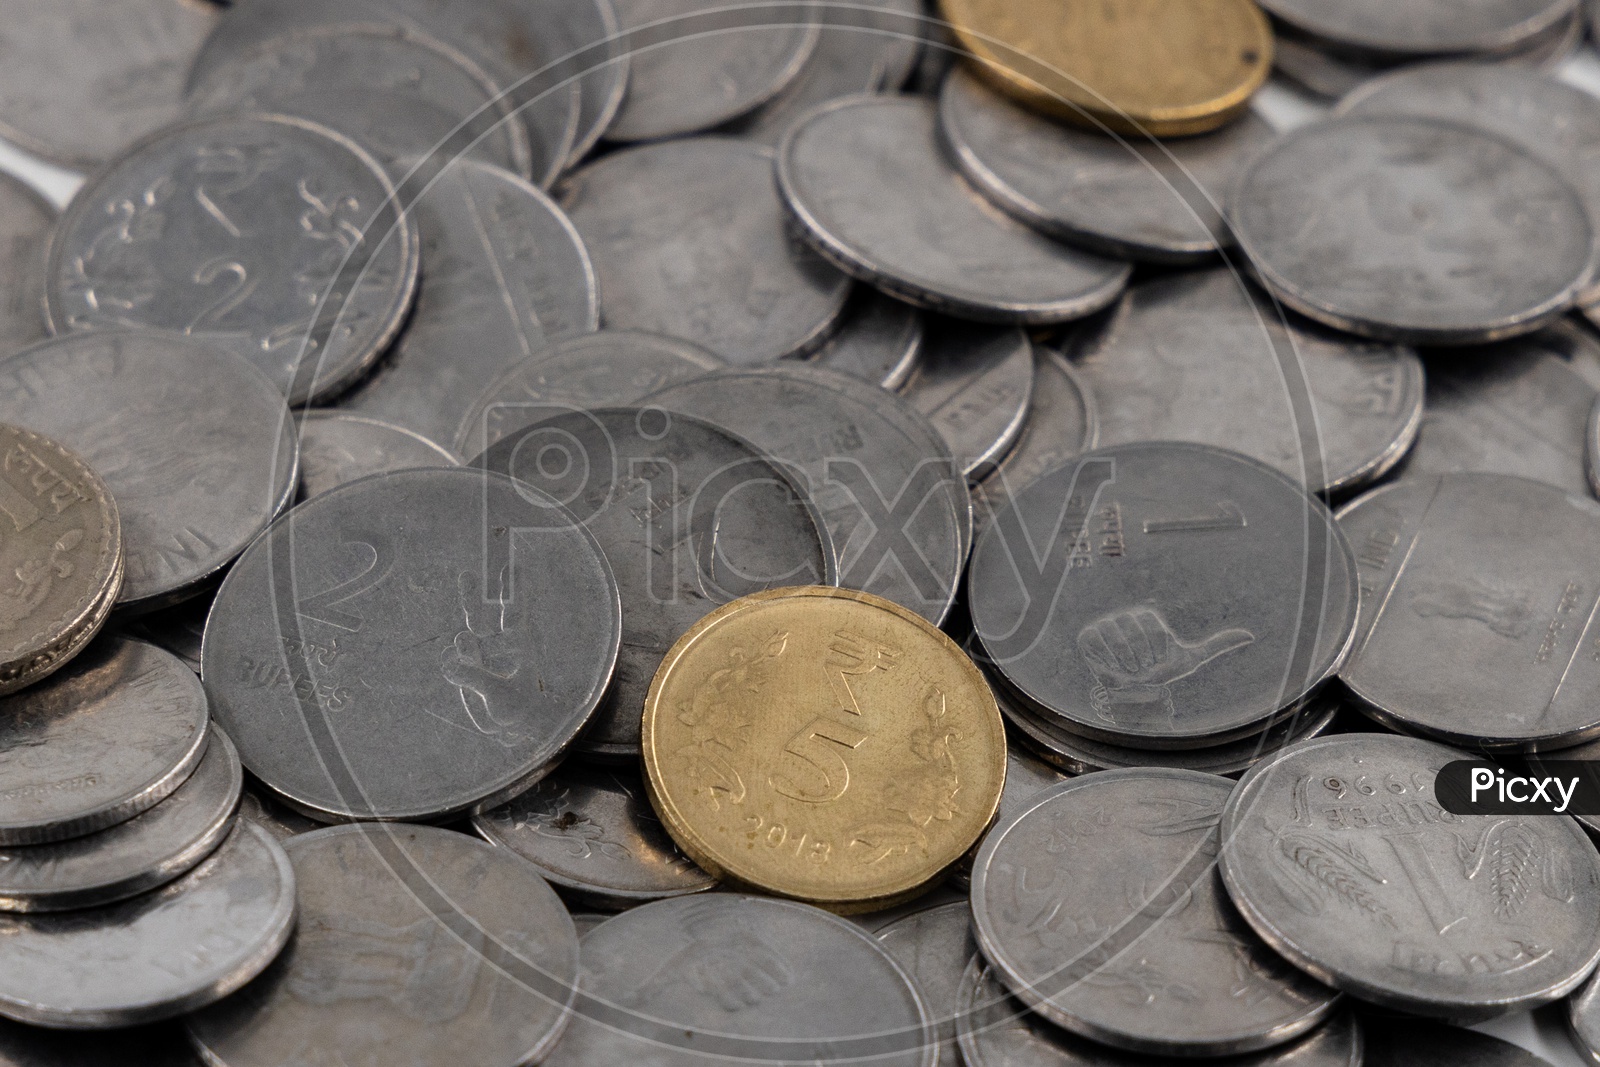 Indian Coin Currency  Metal Currency  Rupee Coins